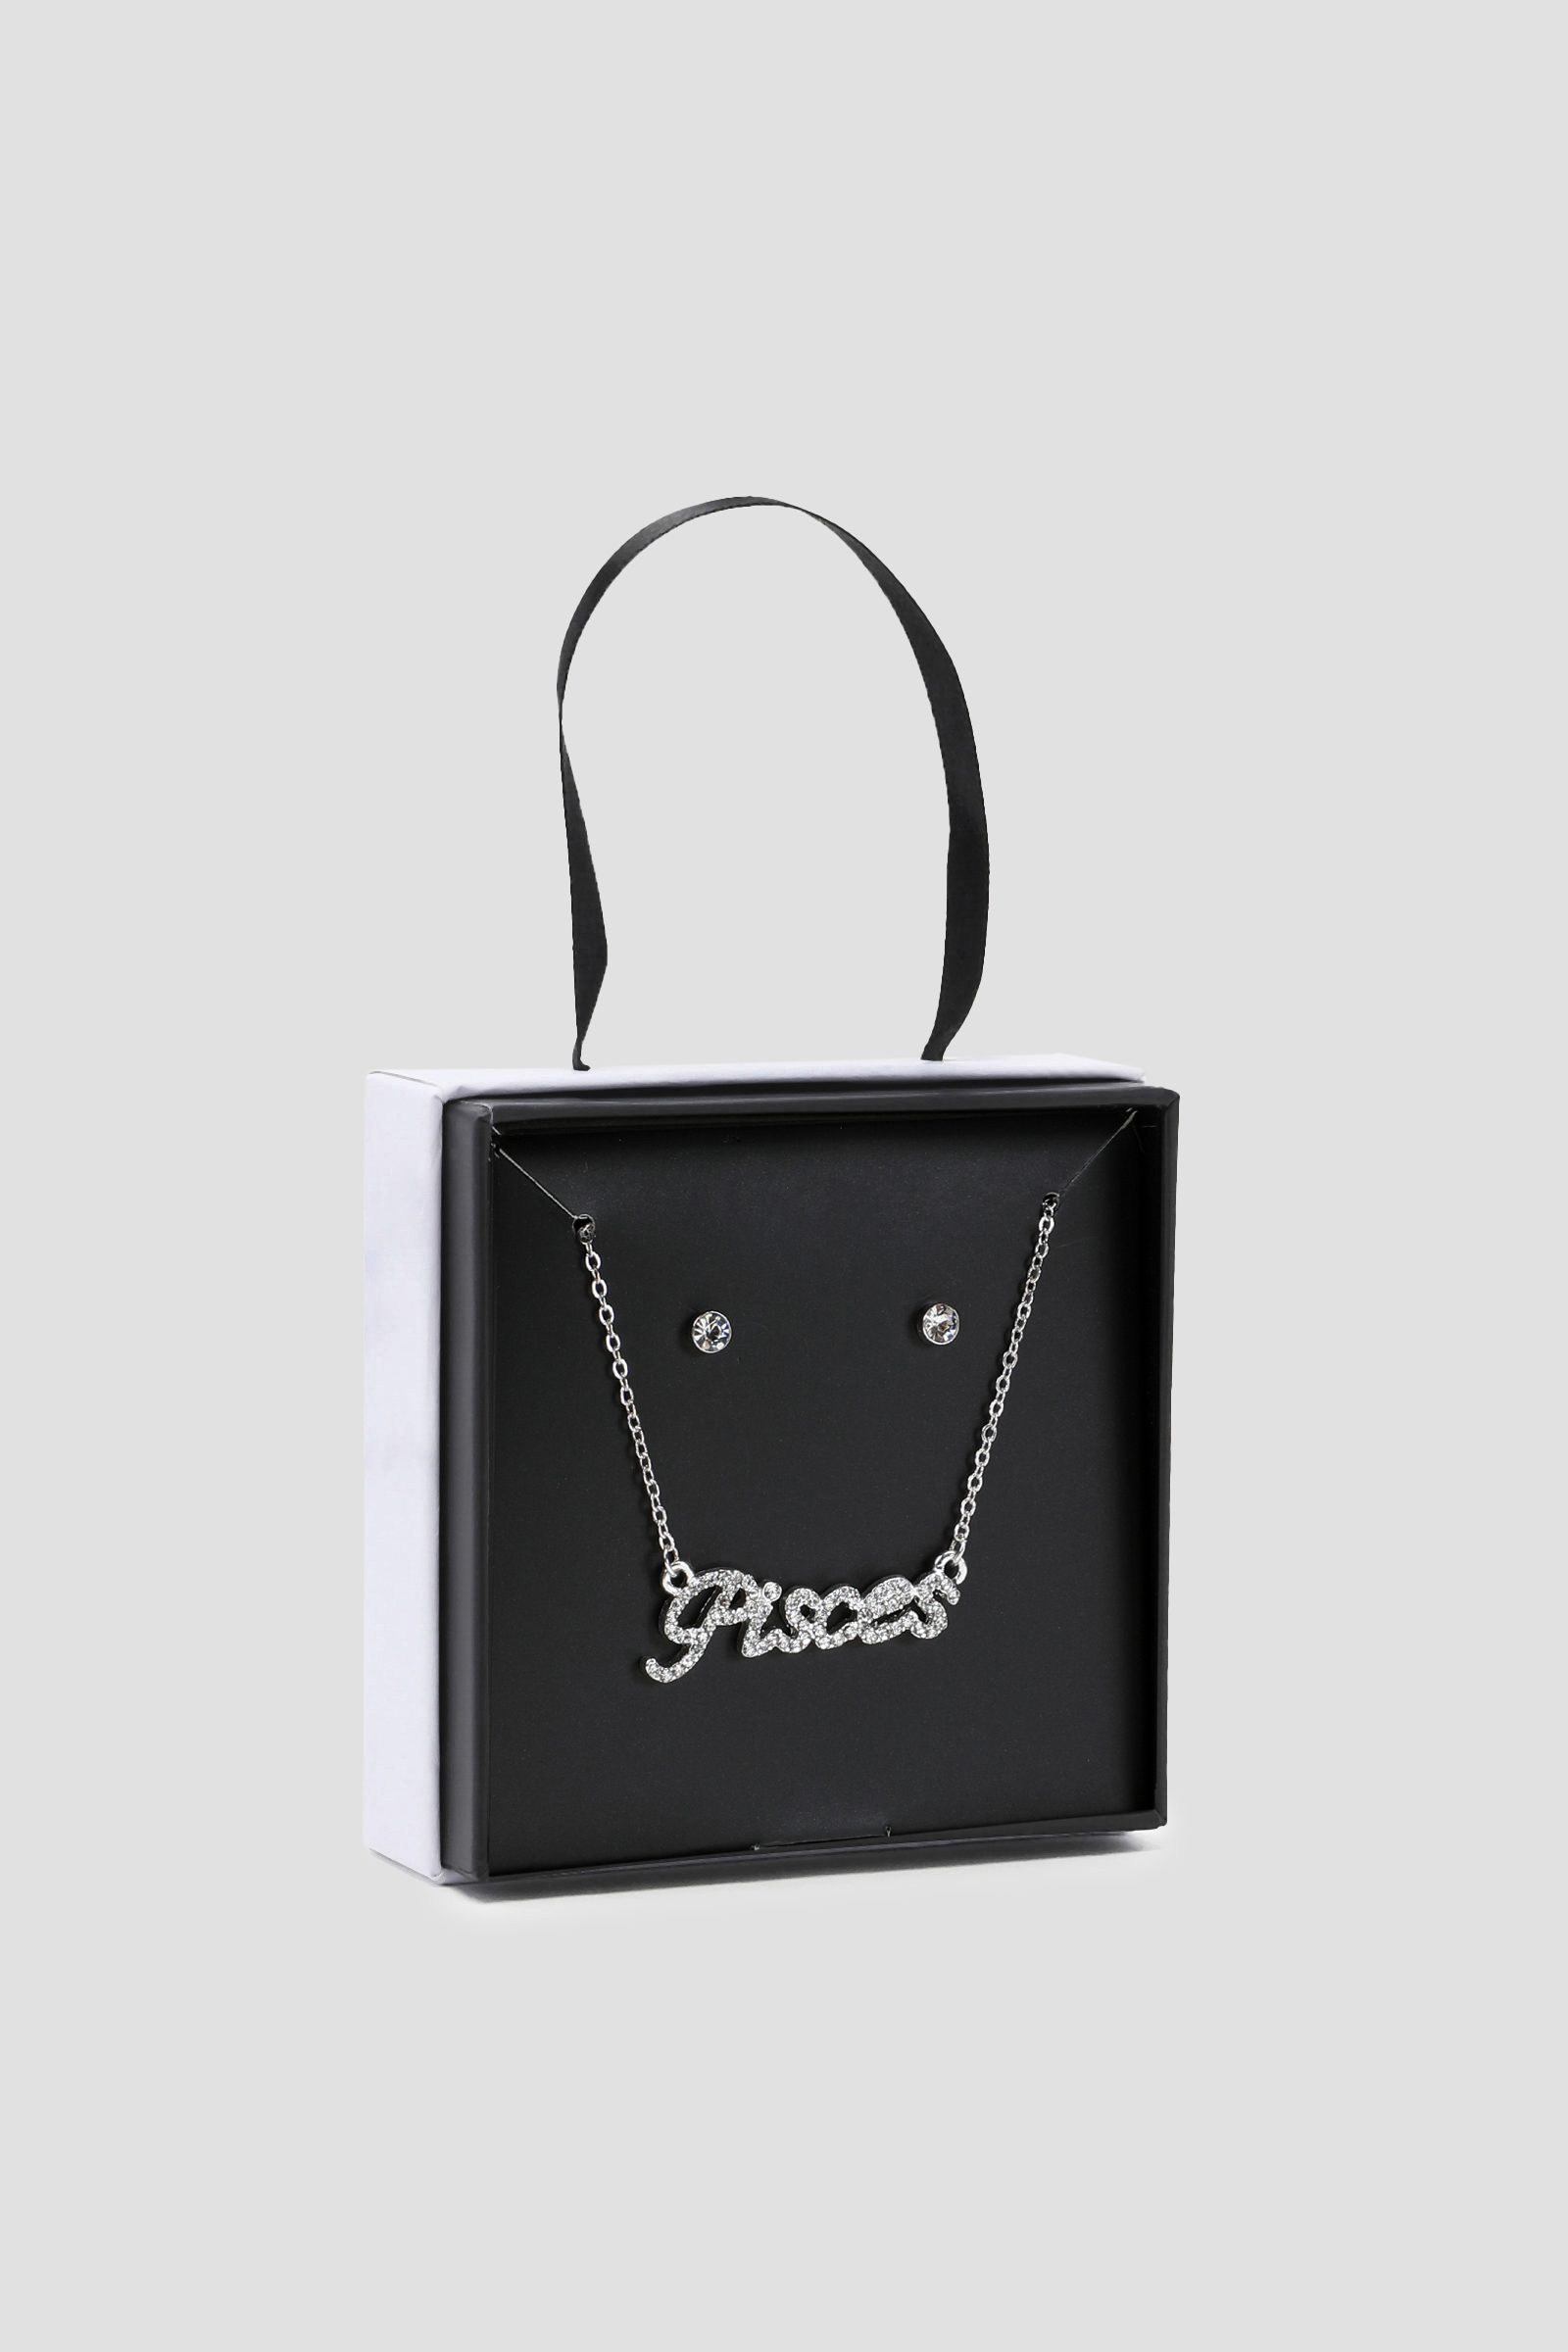 Ardene Pisces Necklace & Earring Gift Set in Silver | Stainless Steel